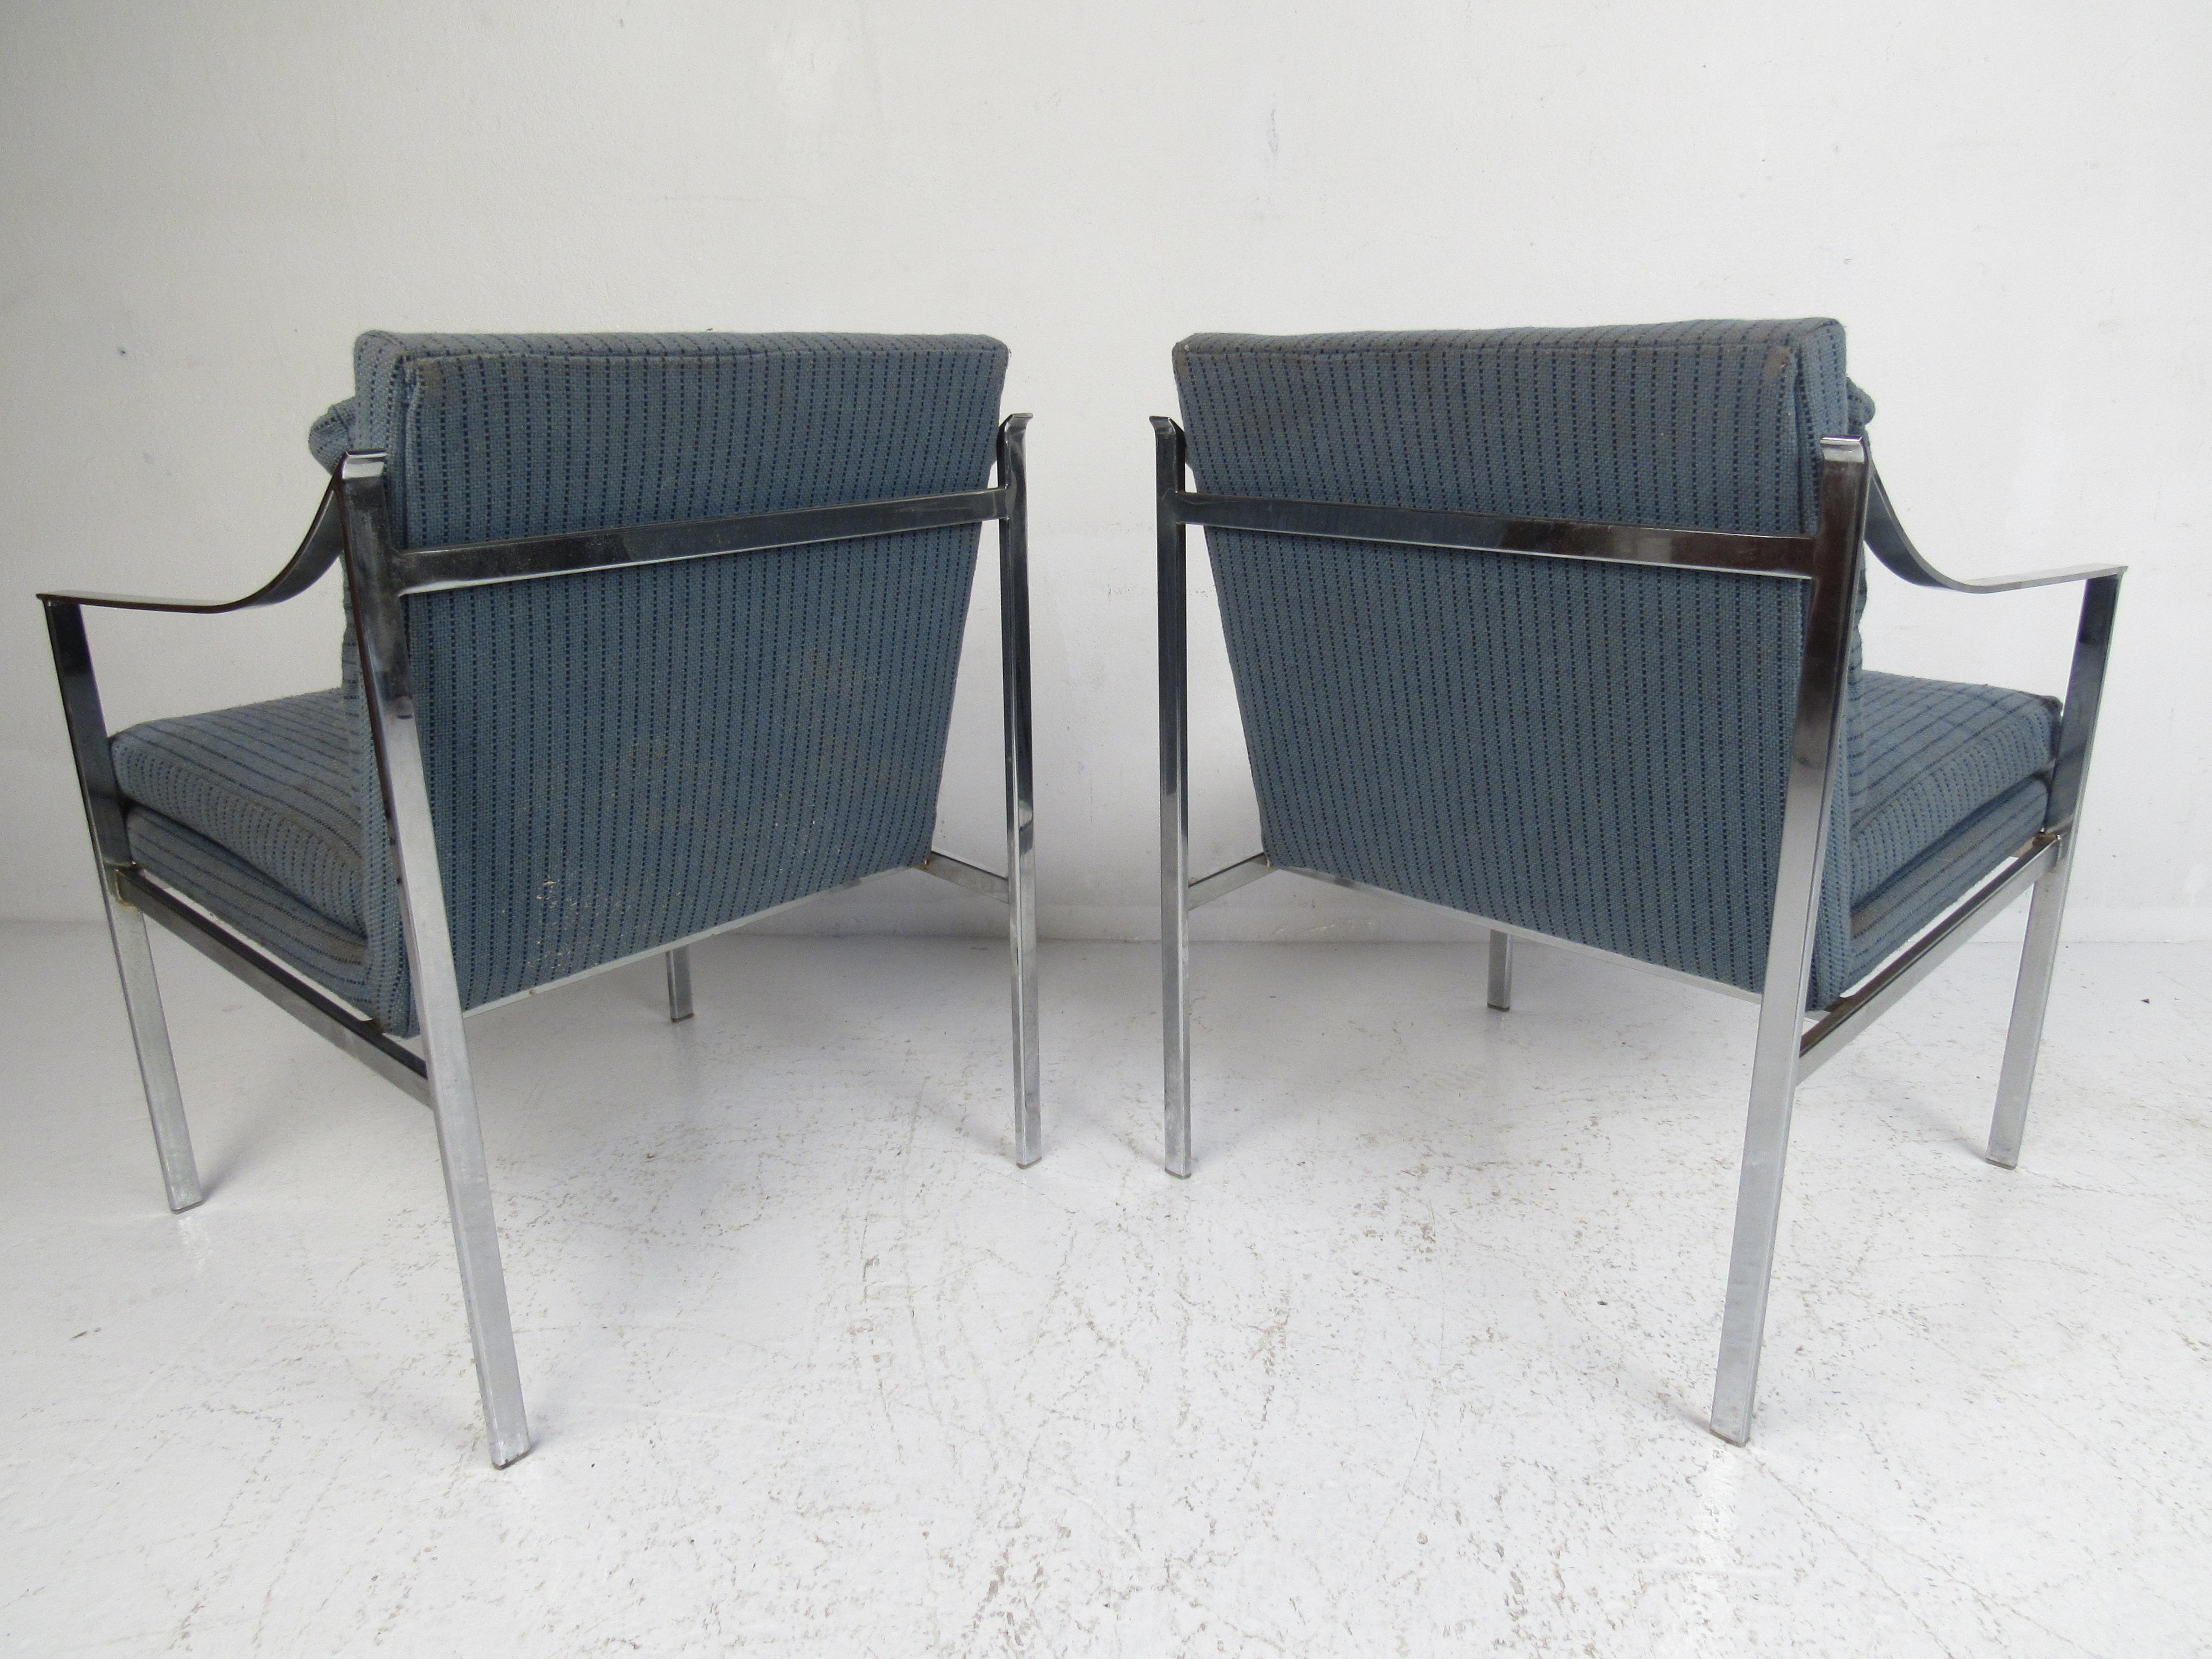 Upholstery Pair of Mid-Century Modern Chrome Lounge Chairs For Sale